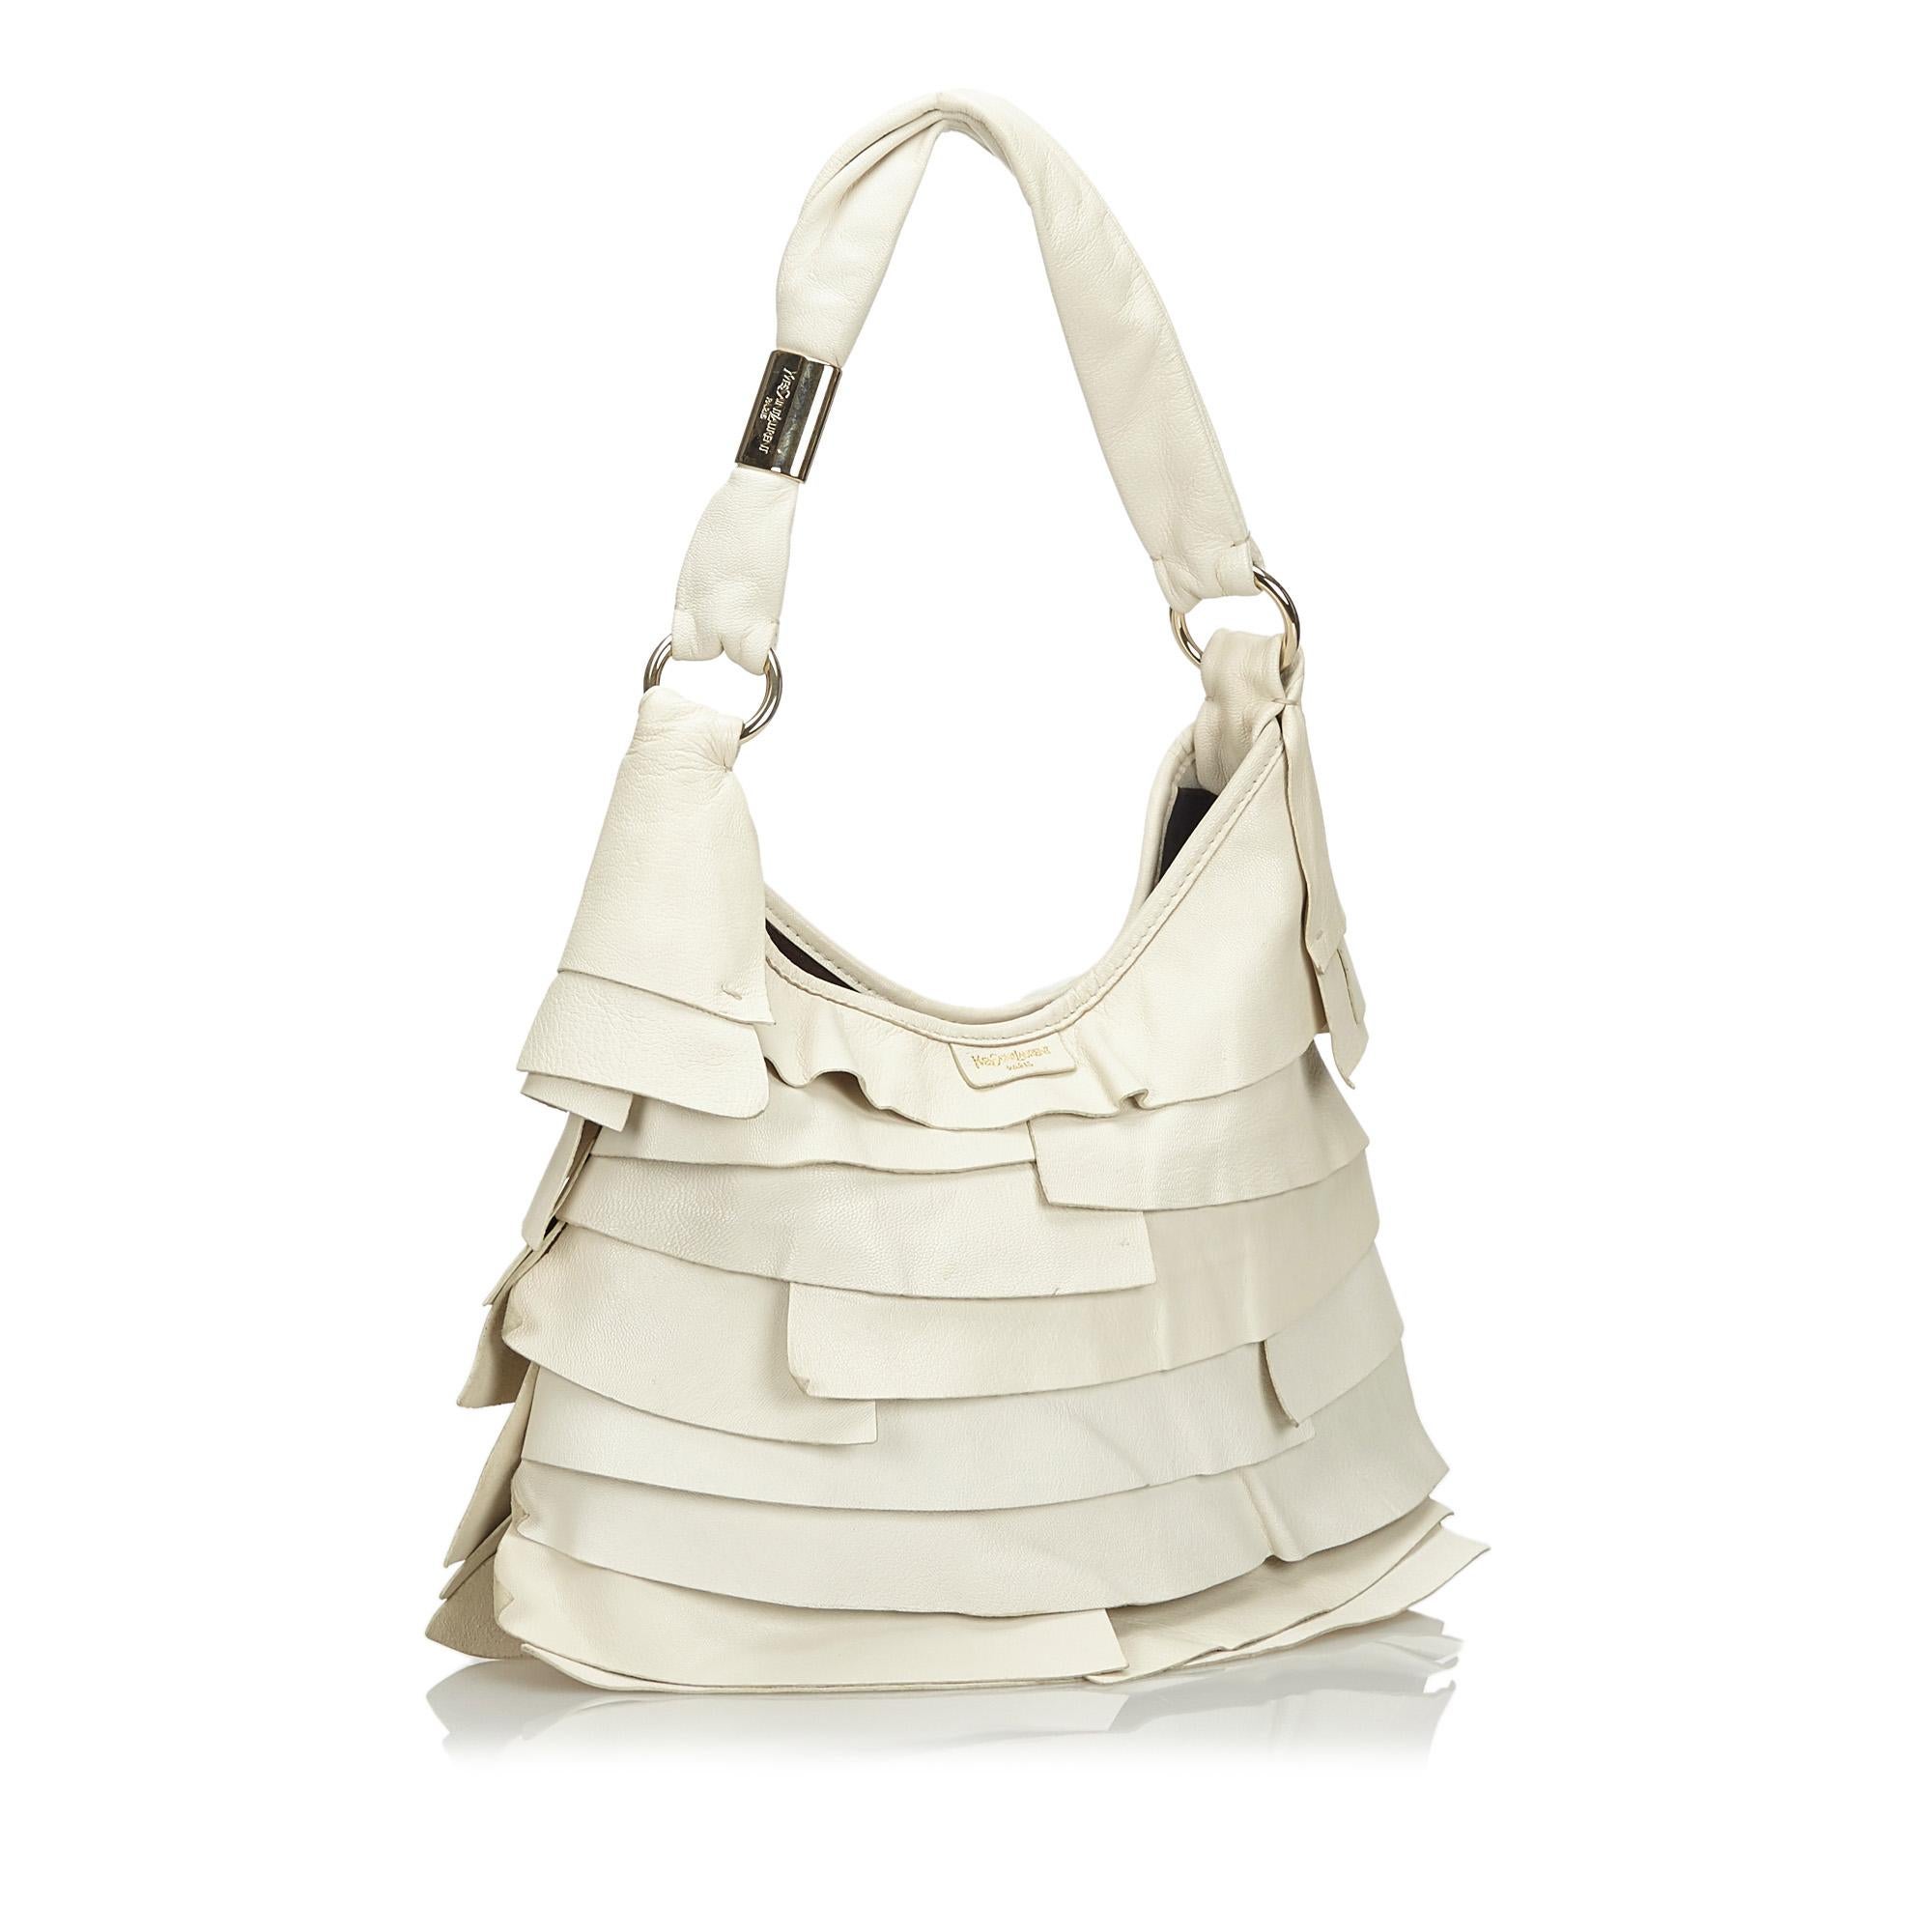 The Saint Tropez features a ruffled leather body, a leather strap, a top magnetic closure, and interior zip and slip pockets. It carries as B+ condition rating.

Inclusions: 
This item does not come with inclusions.

Dimensions:
Length: 30.00